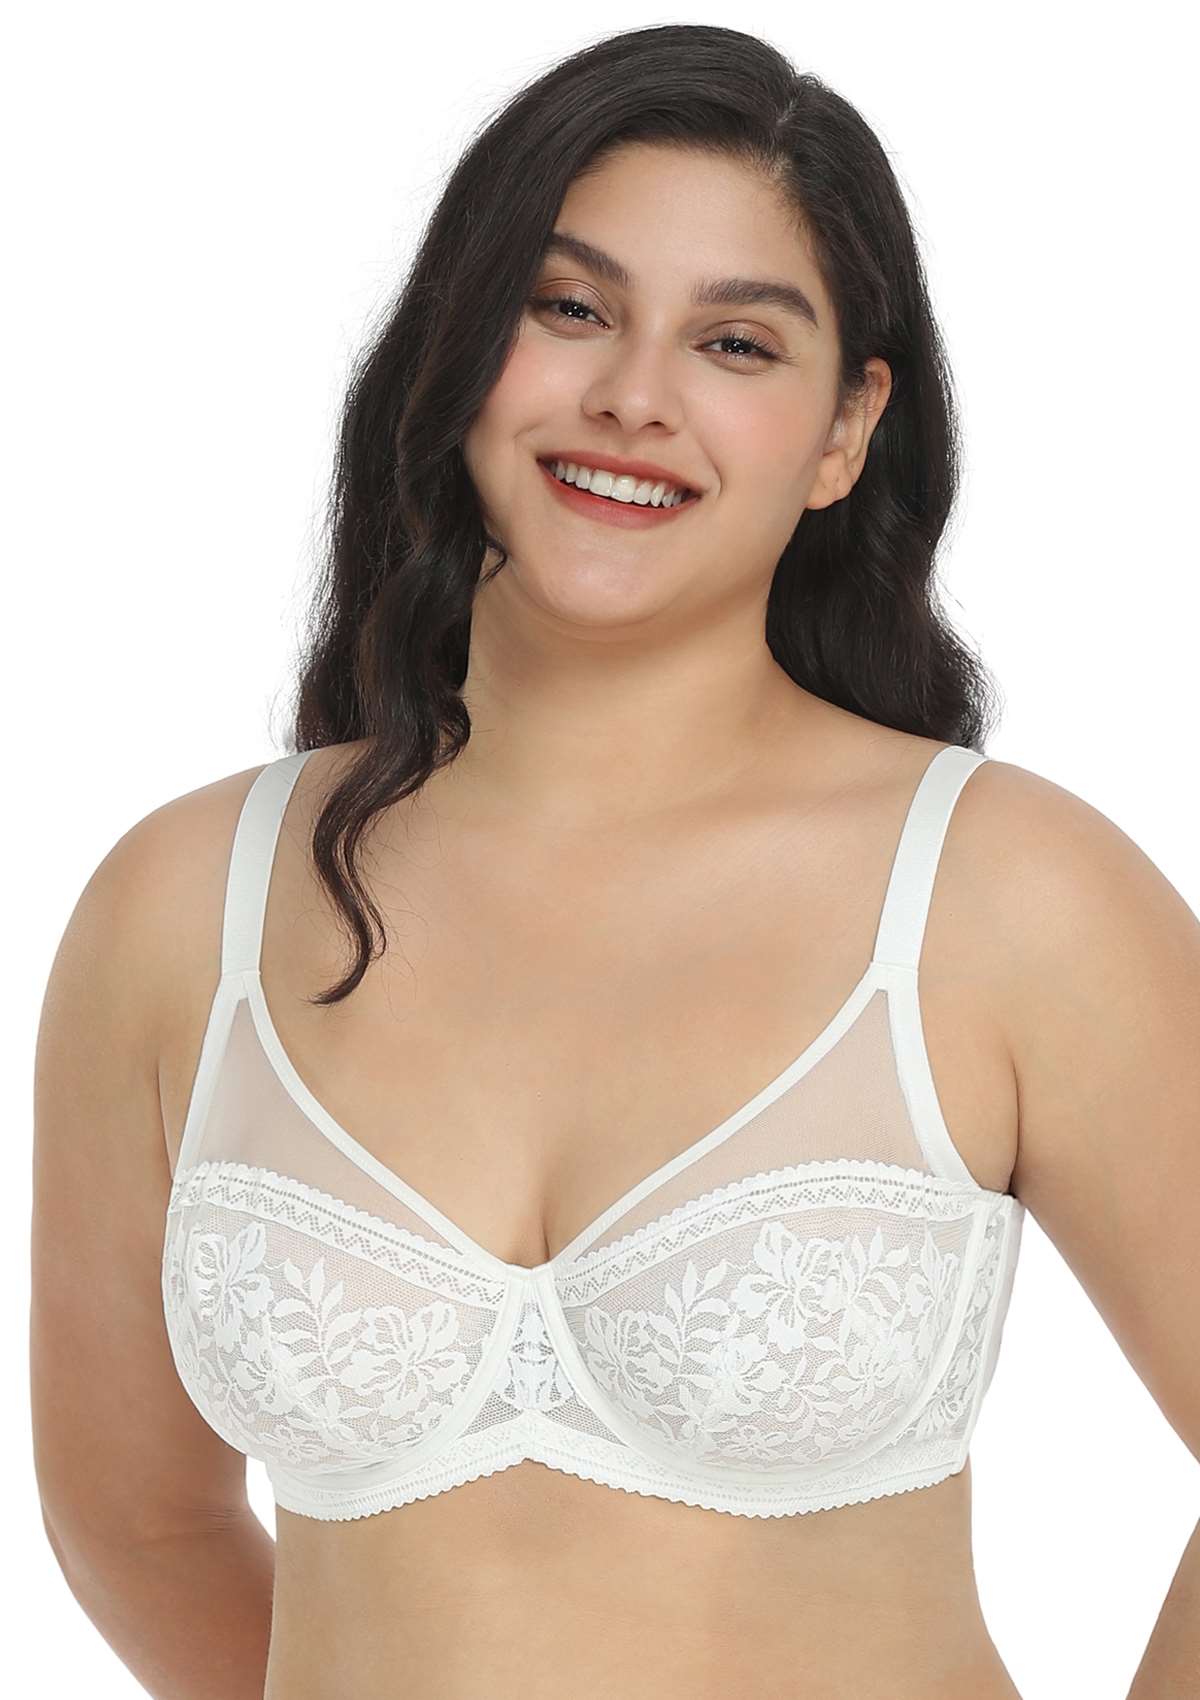 HSIA Gladioli Lace Mesh Minimizing Unlined Underwire Bra For Fuller Busts - White / 44 / D